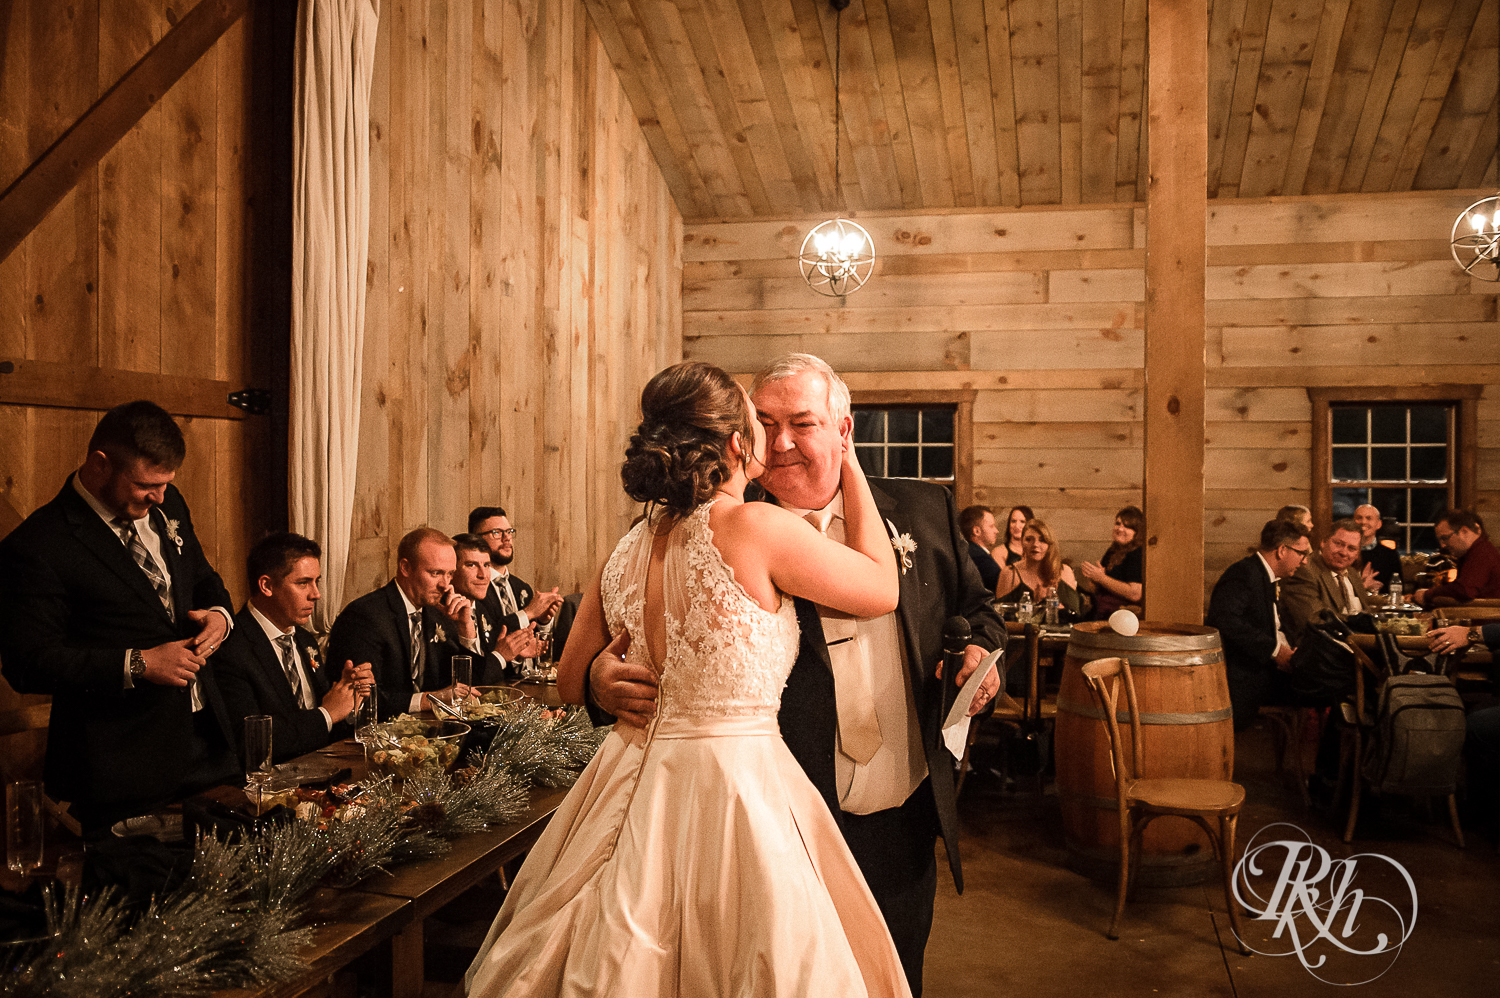 Bride and groom smile during new year's eve wedding reception at Creekside Farm in Rush City, Minnesota.